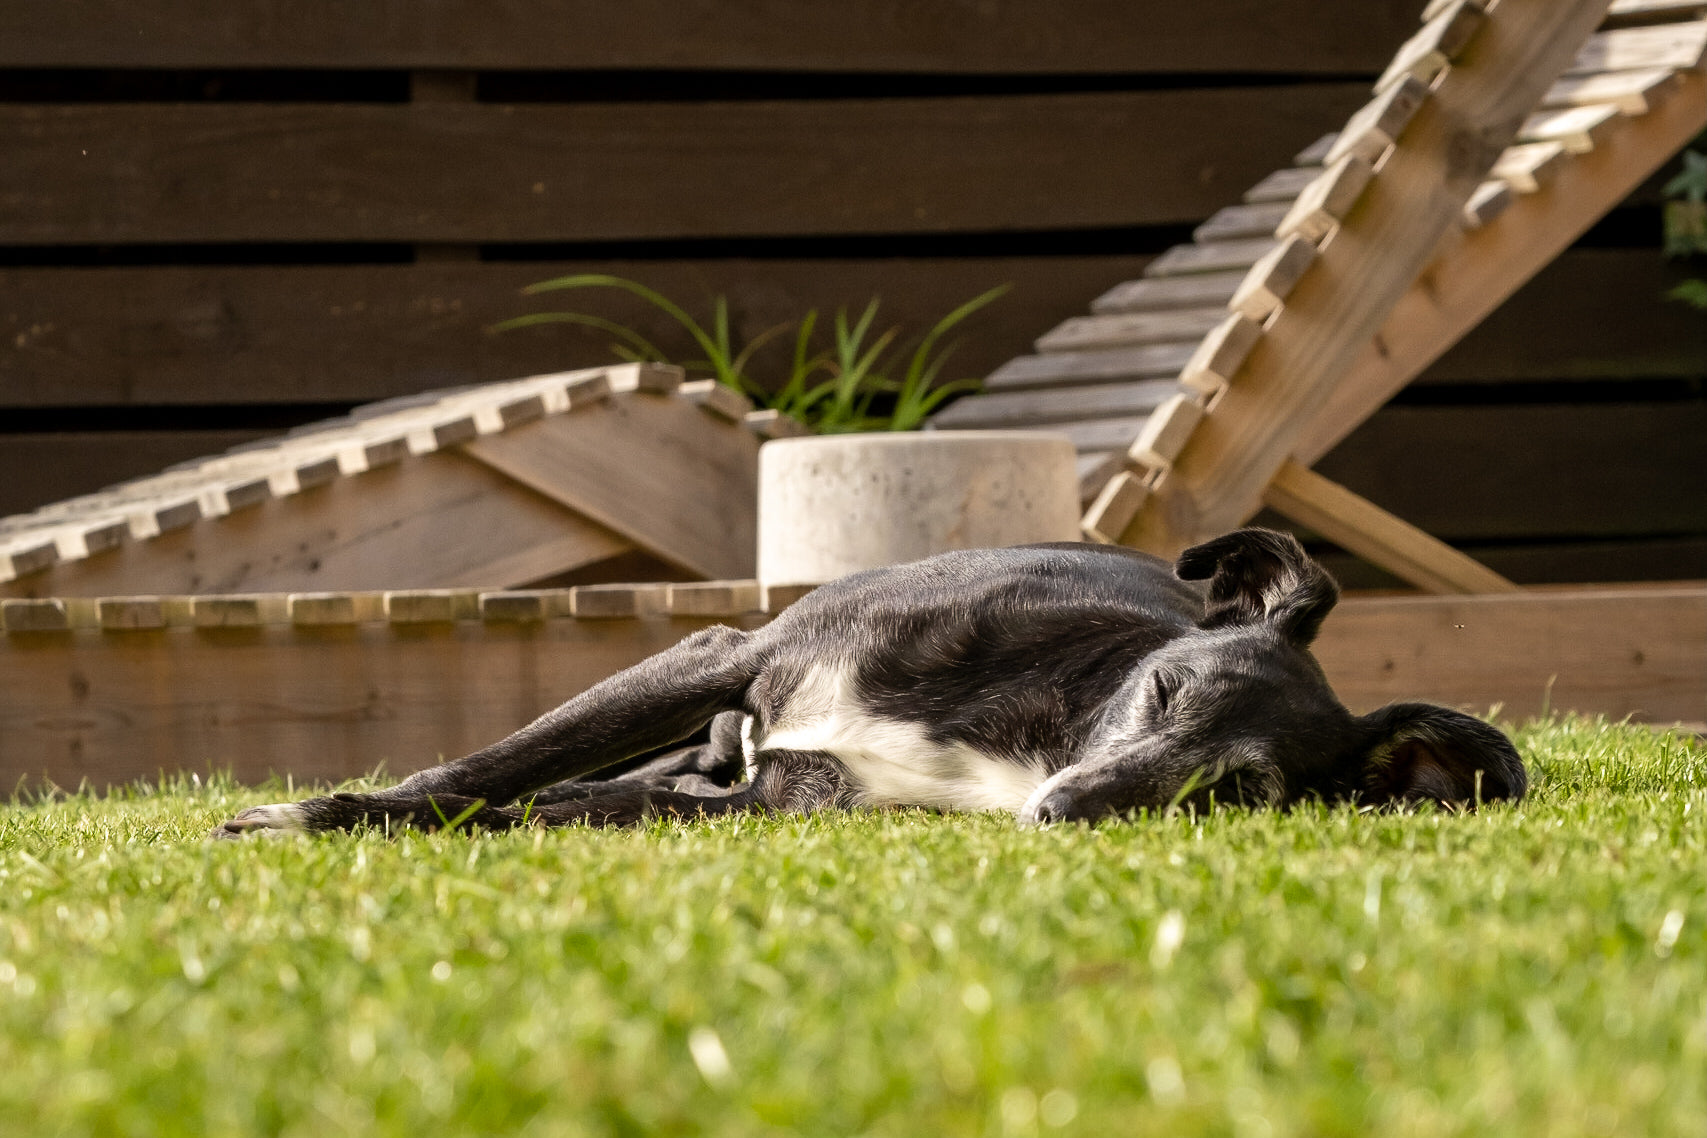 Tips for looking after your dog in warm weather